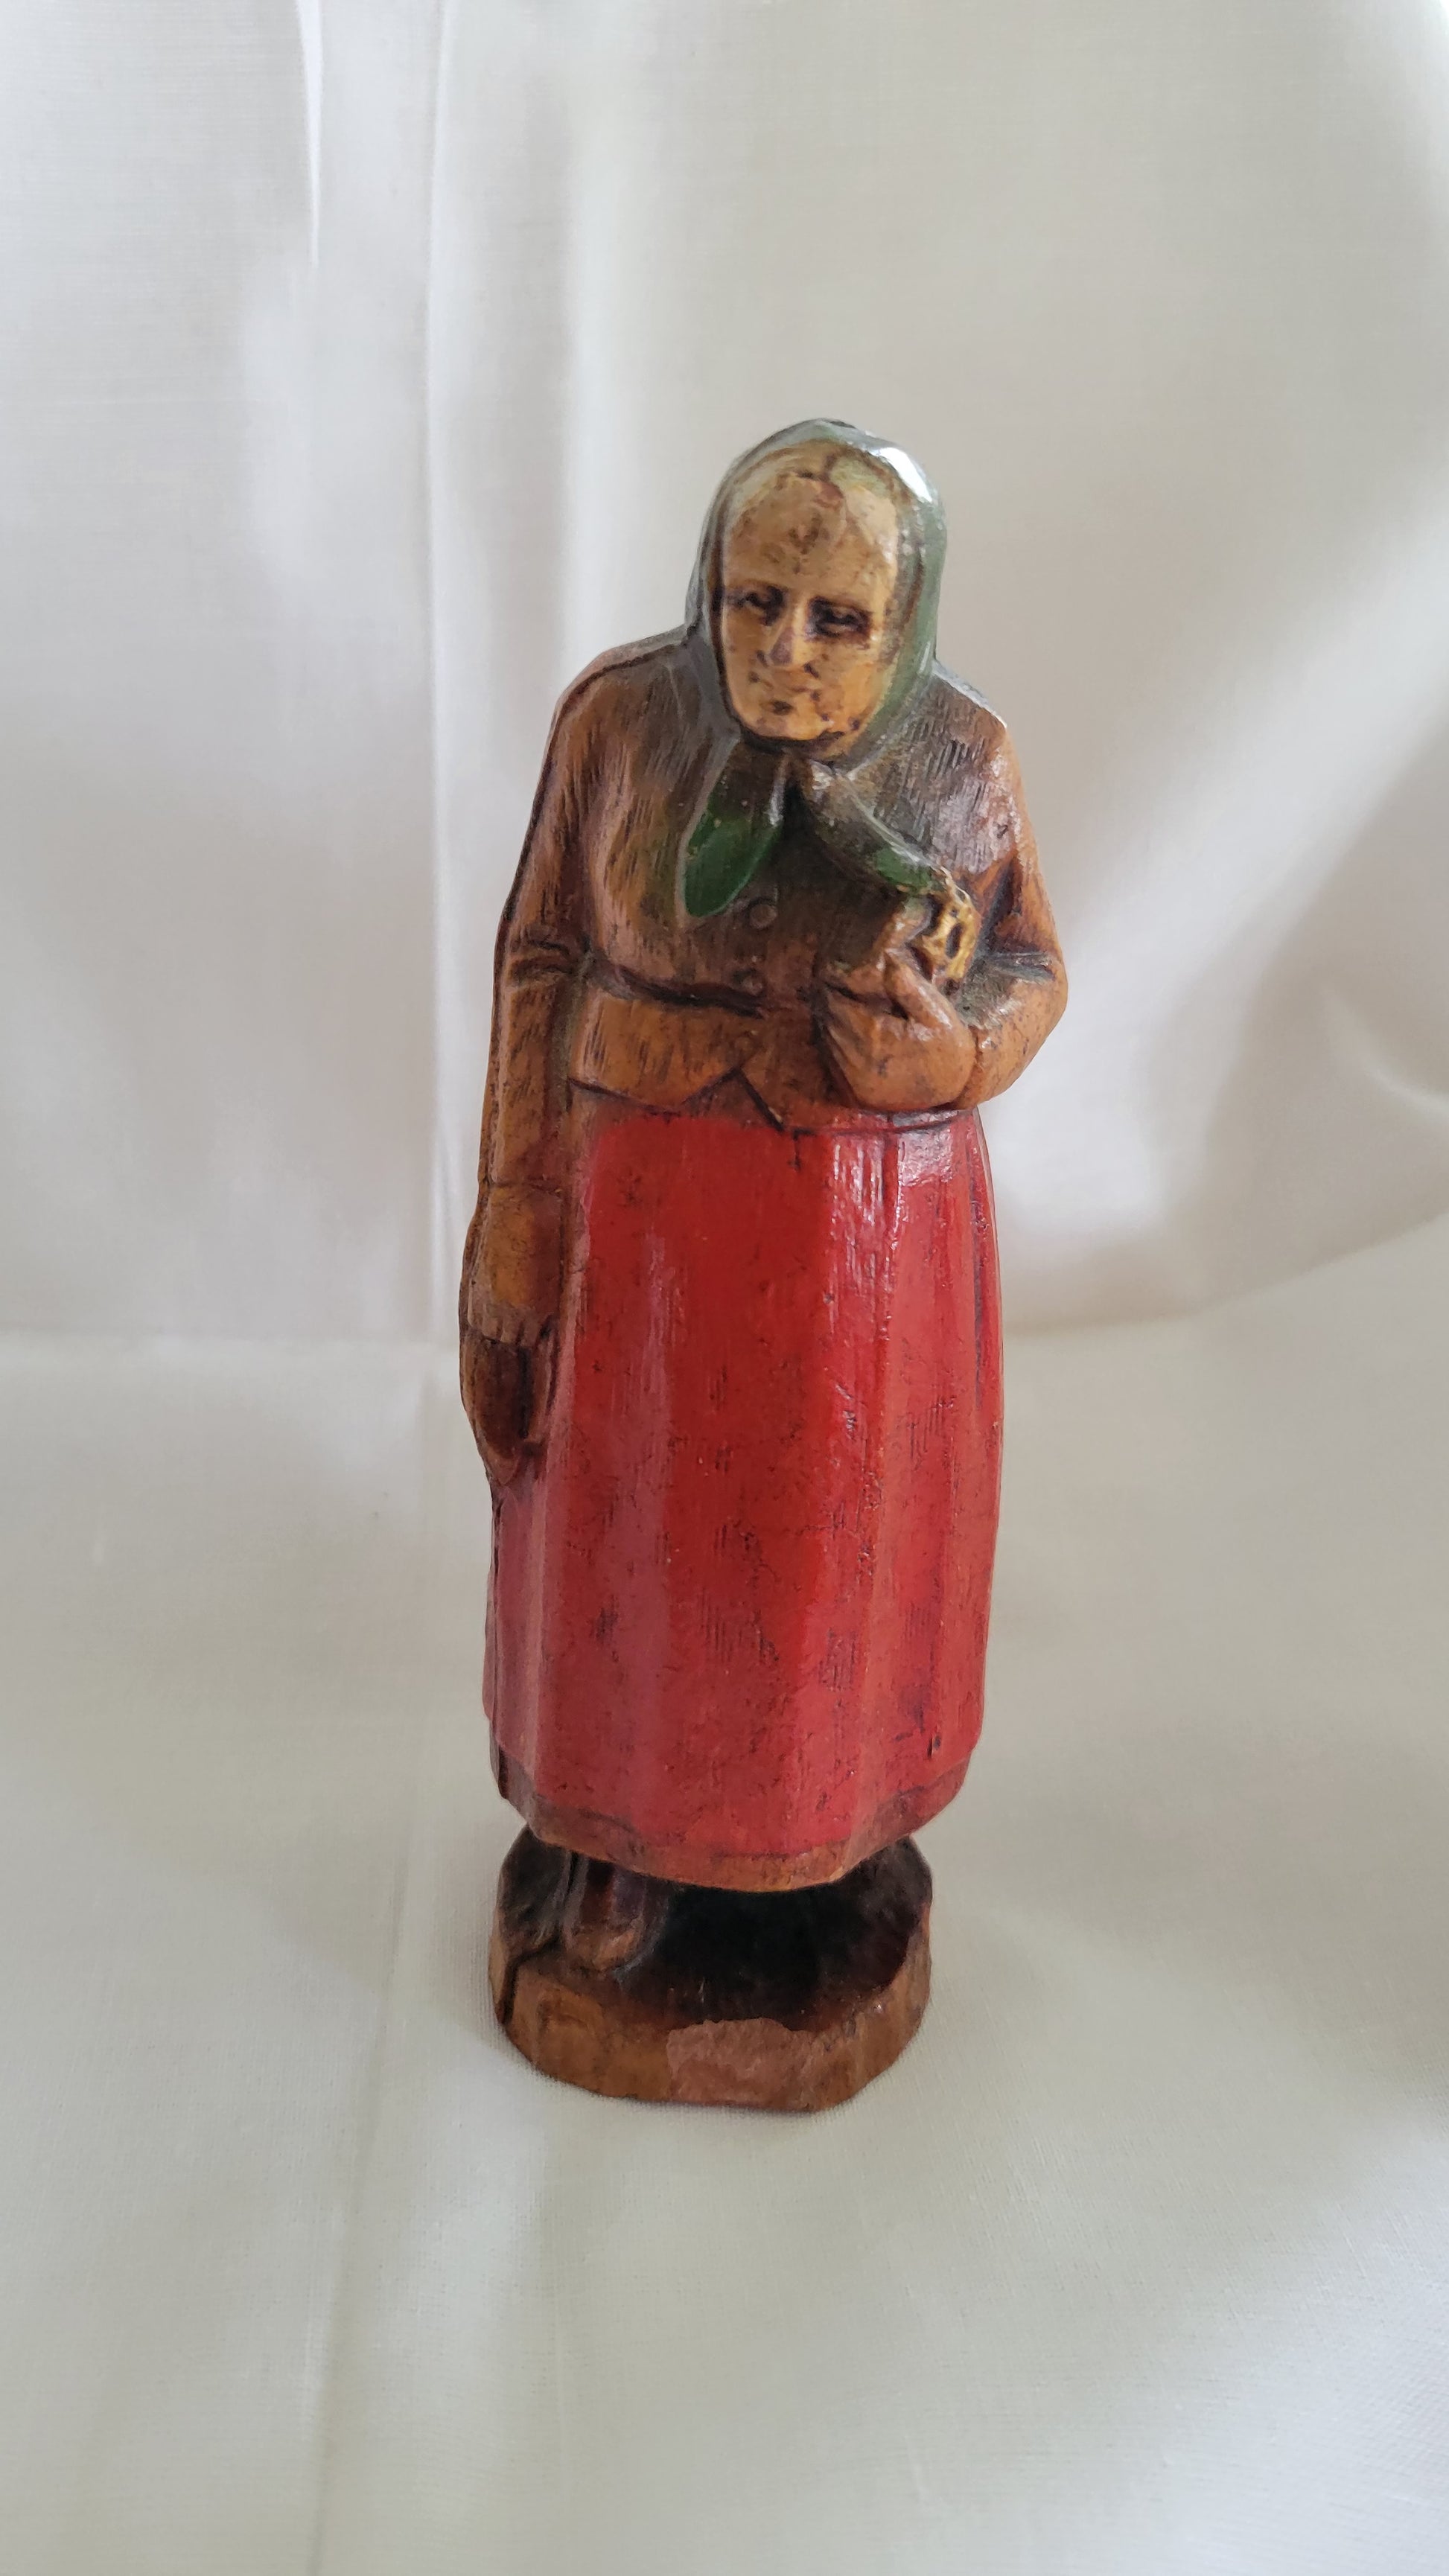 Small Jewish, Yiddish grandmother or Bubbe figure, antique, holding Jewish Bible, possibly SyrocoWood. Front view.